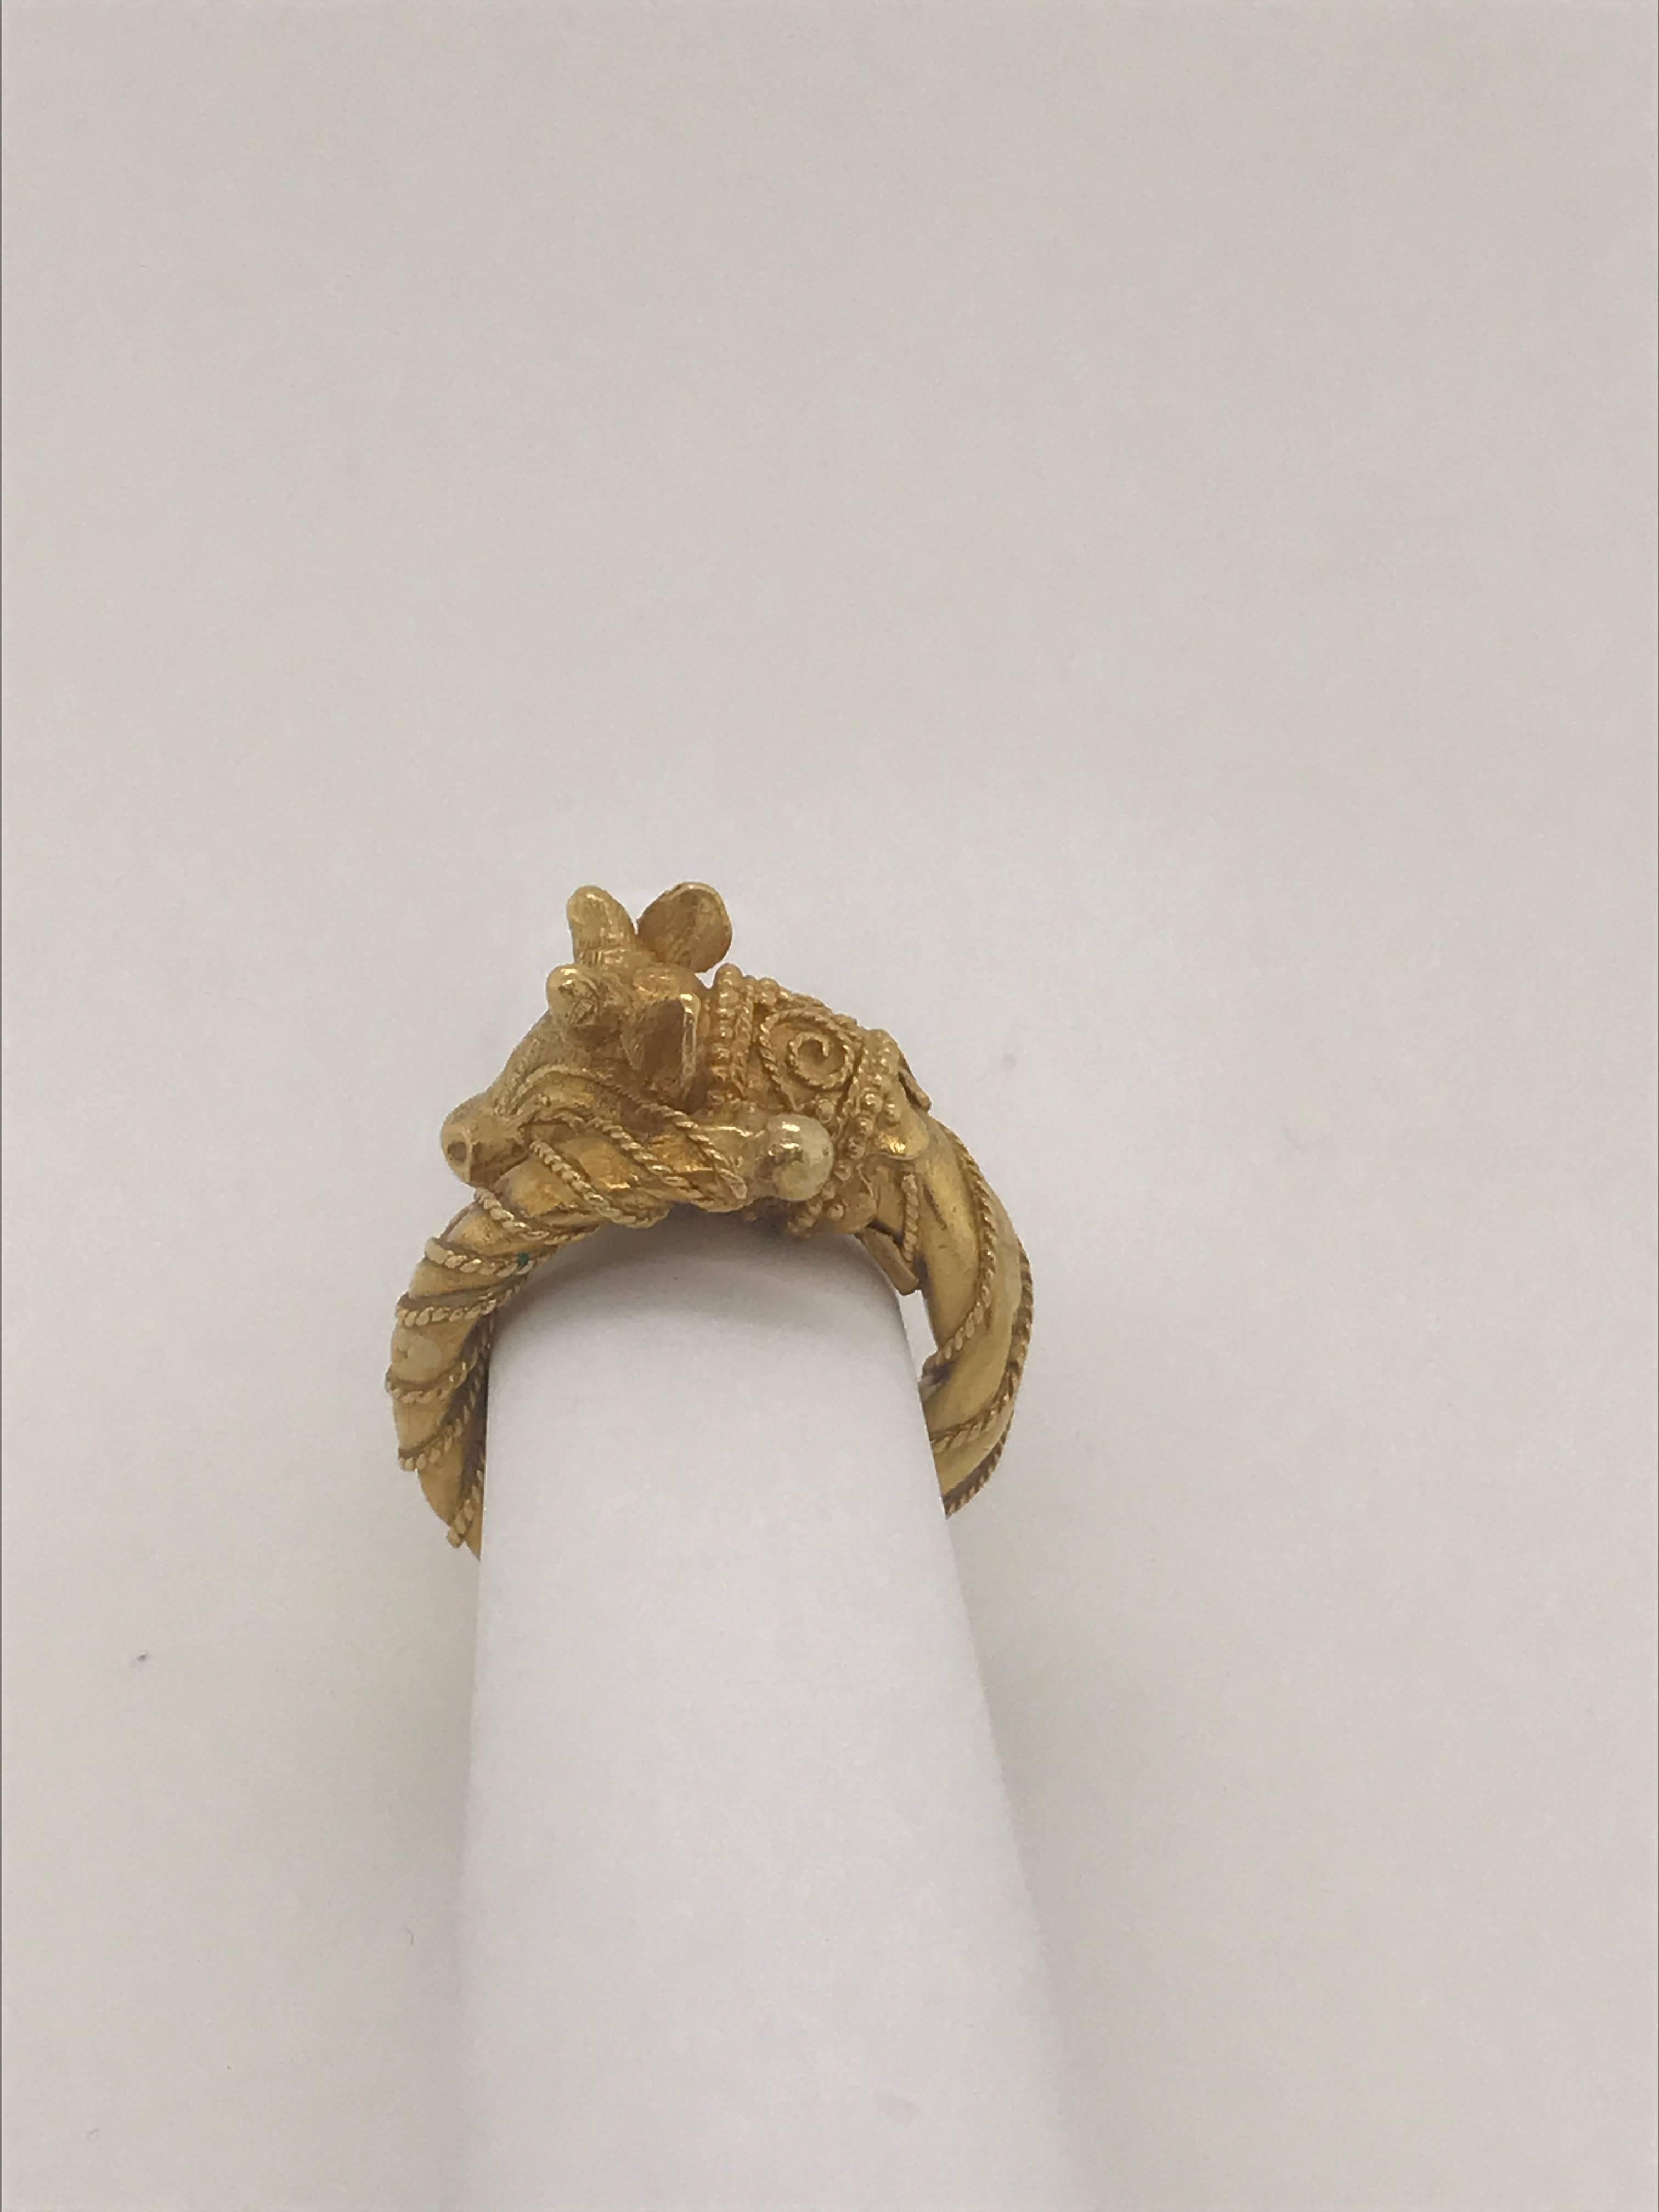 Decorative Ring by Zolotas in 22 Karat Yellow Gold 1